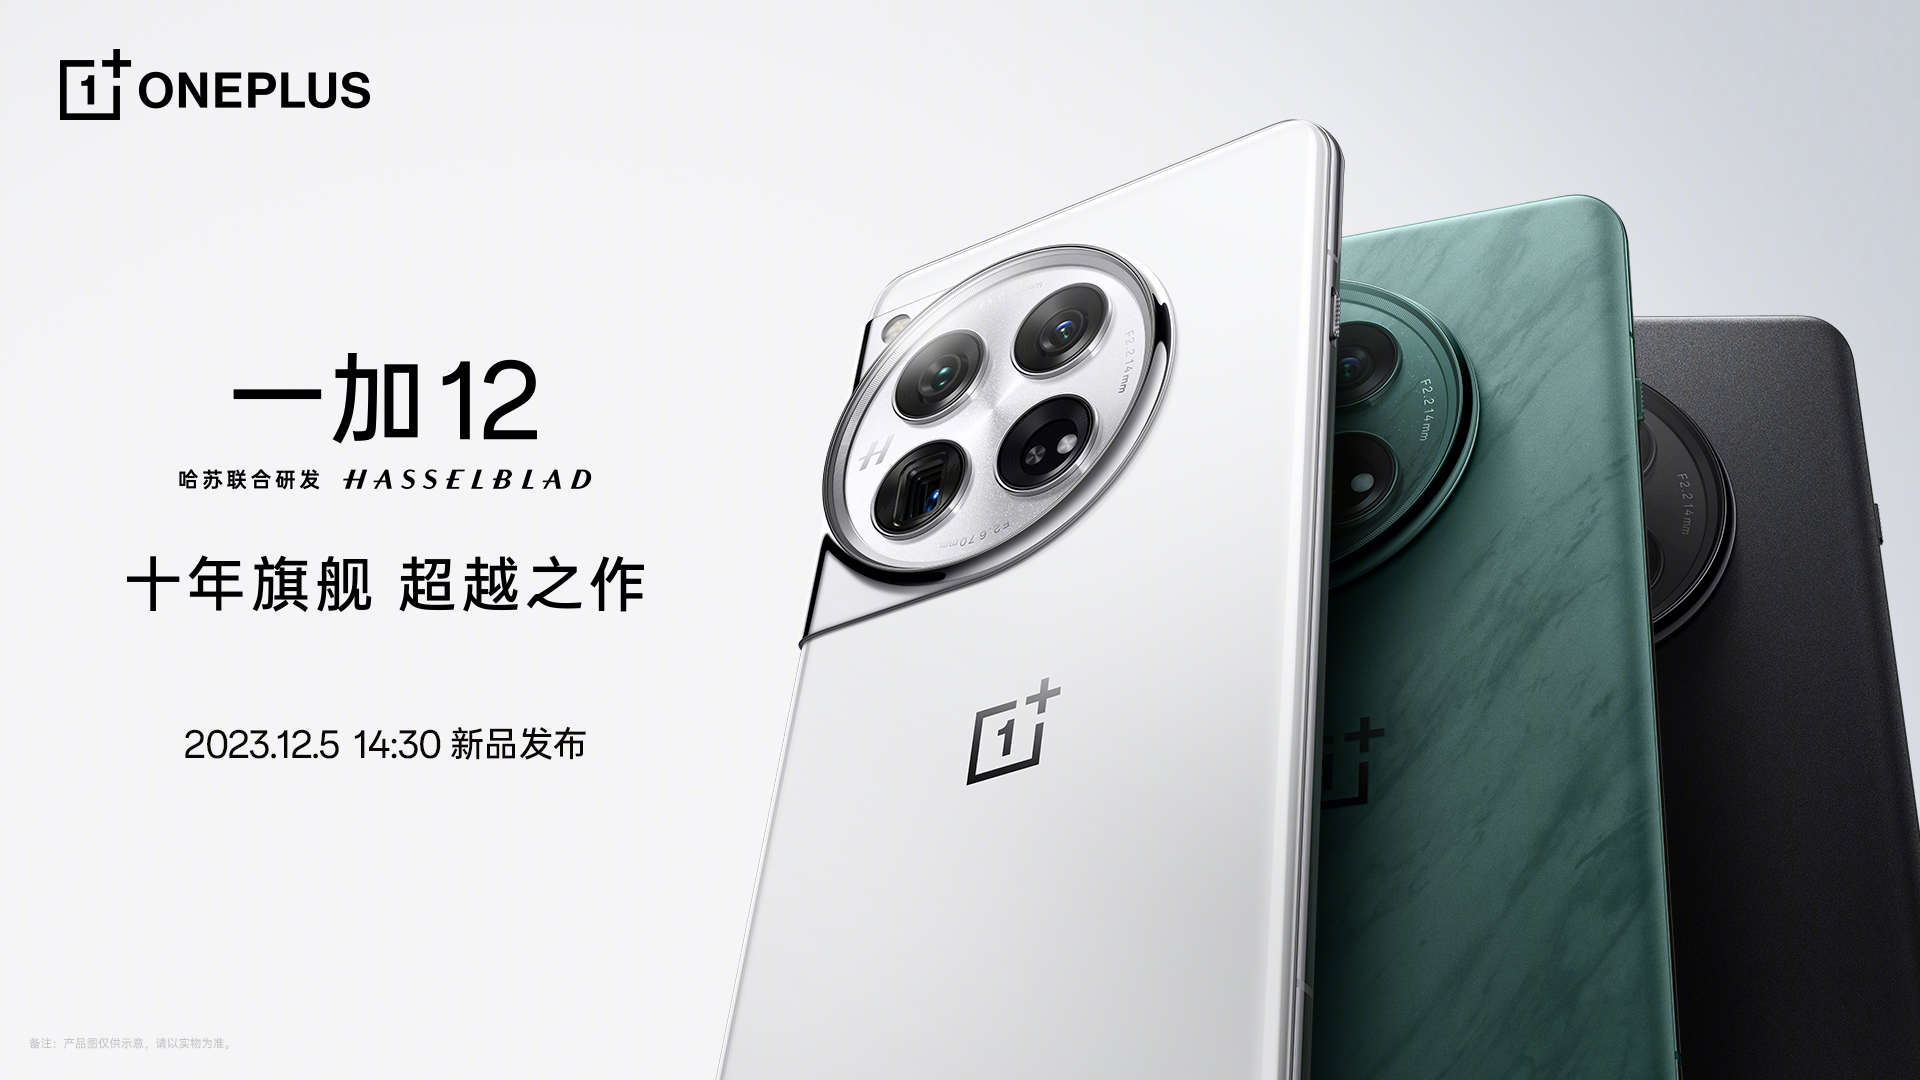 The OnePlus 12's launch date has been officially revealed